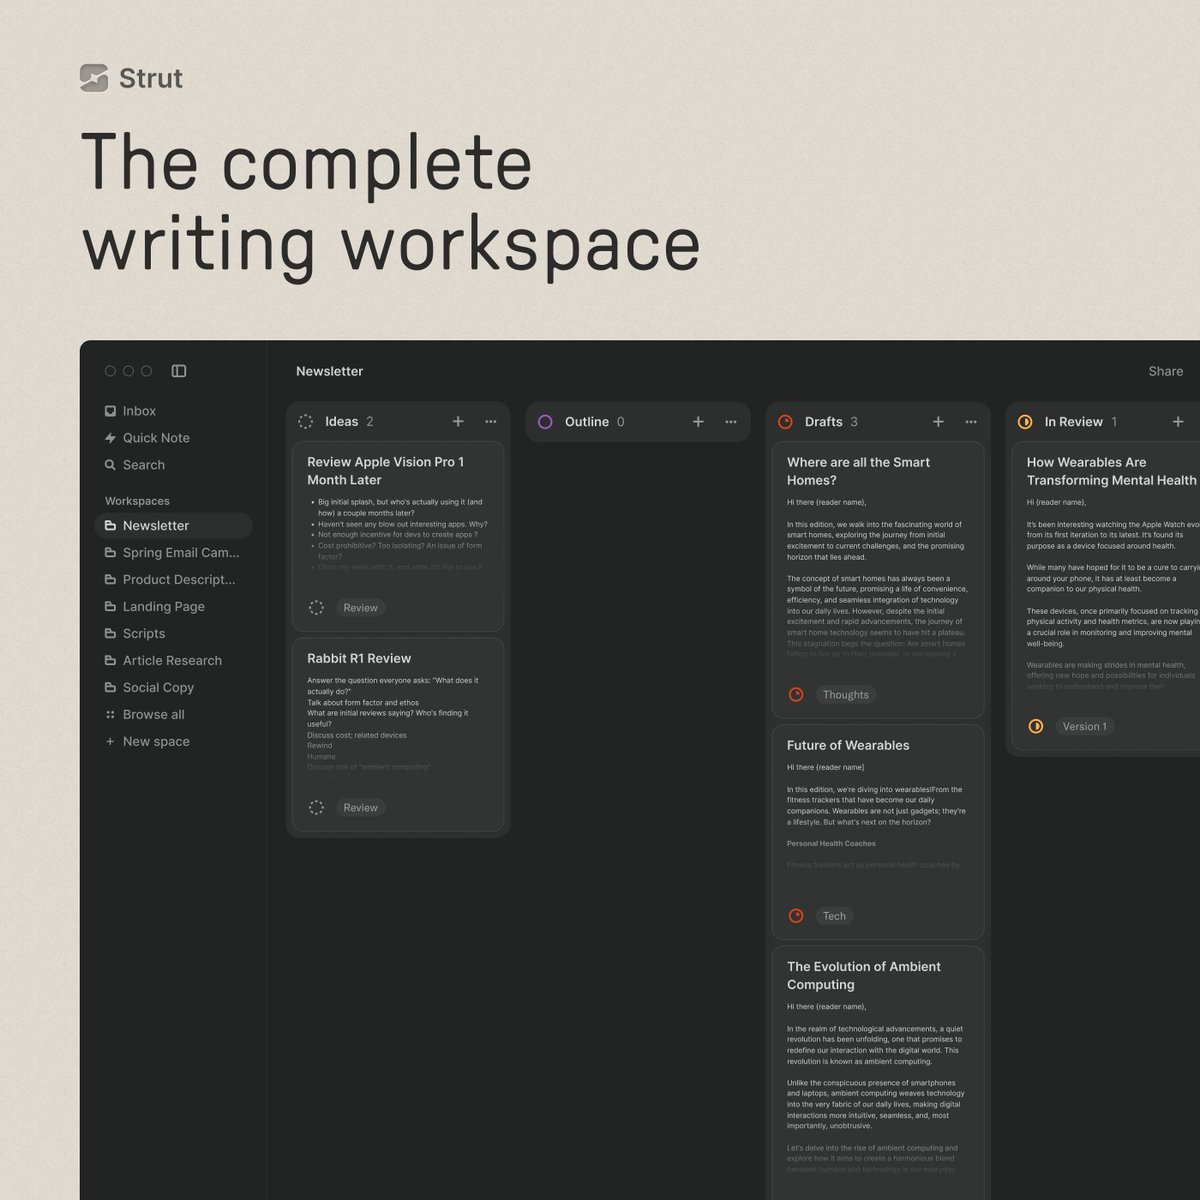 Announcing the next phase of Strut—the complete workspace for writers. Strut now brings all your writing tools together into one simple app. Capture notes, organize projects, and collaborate with your team. All in one place, supported by AI. Here's how it works👇